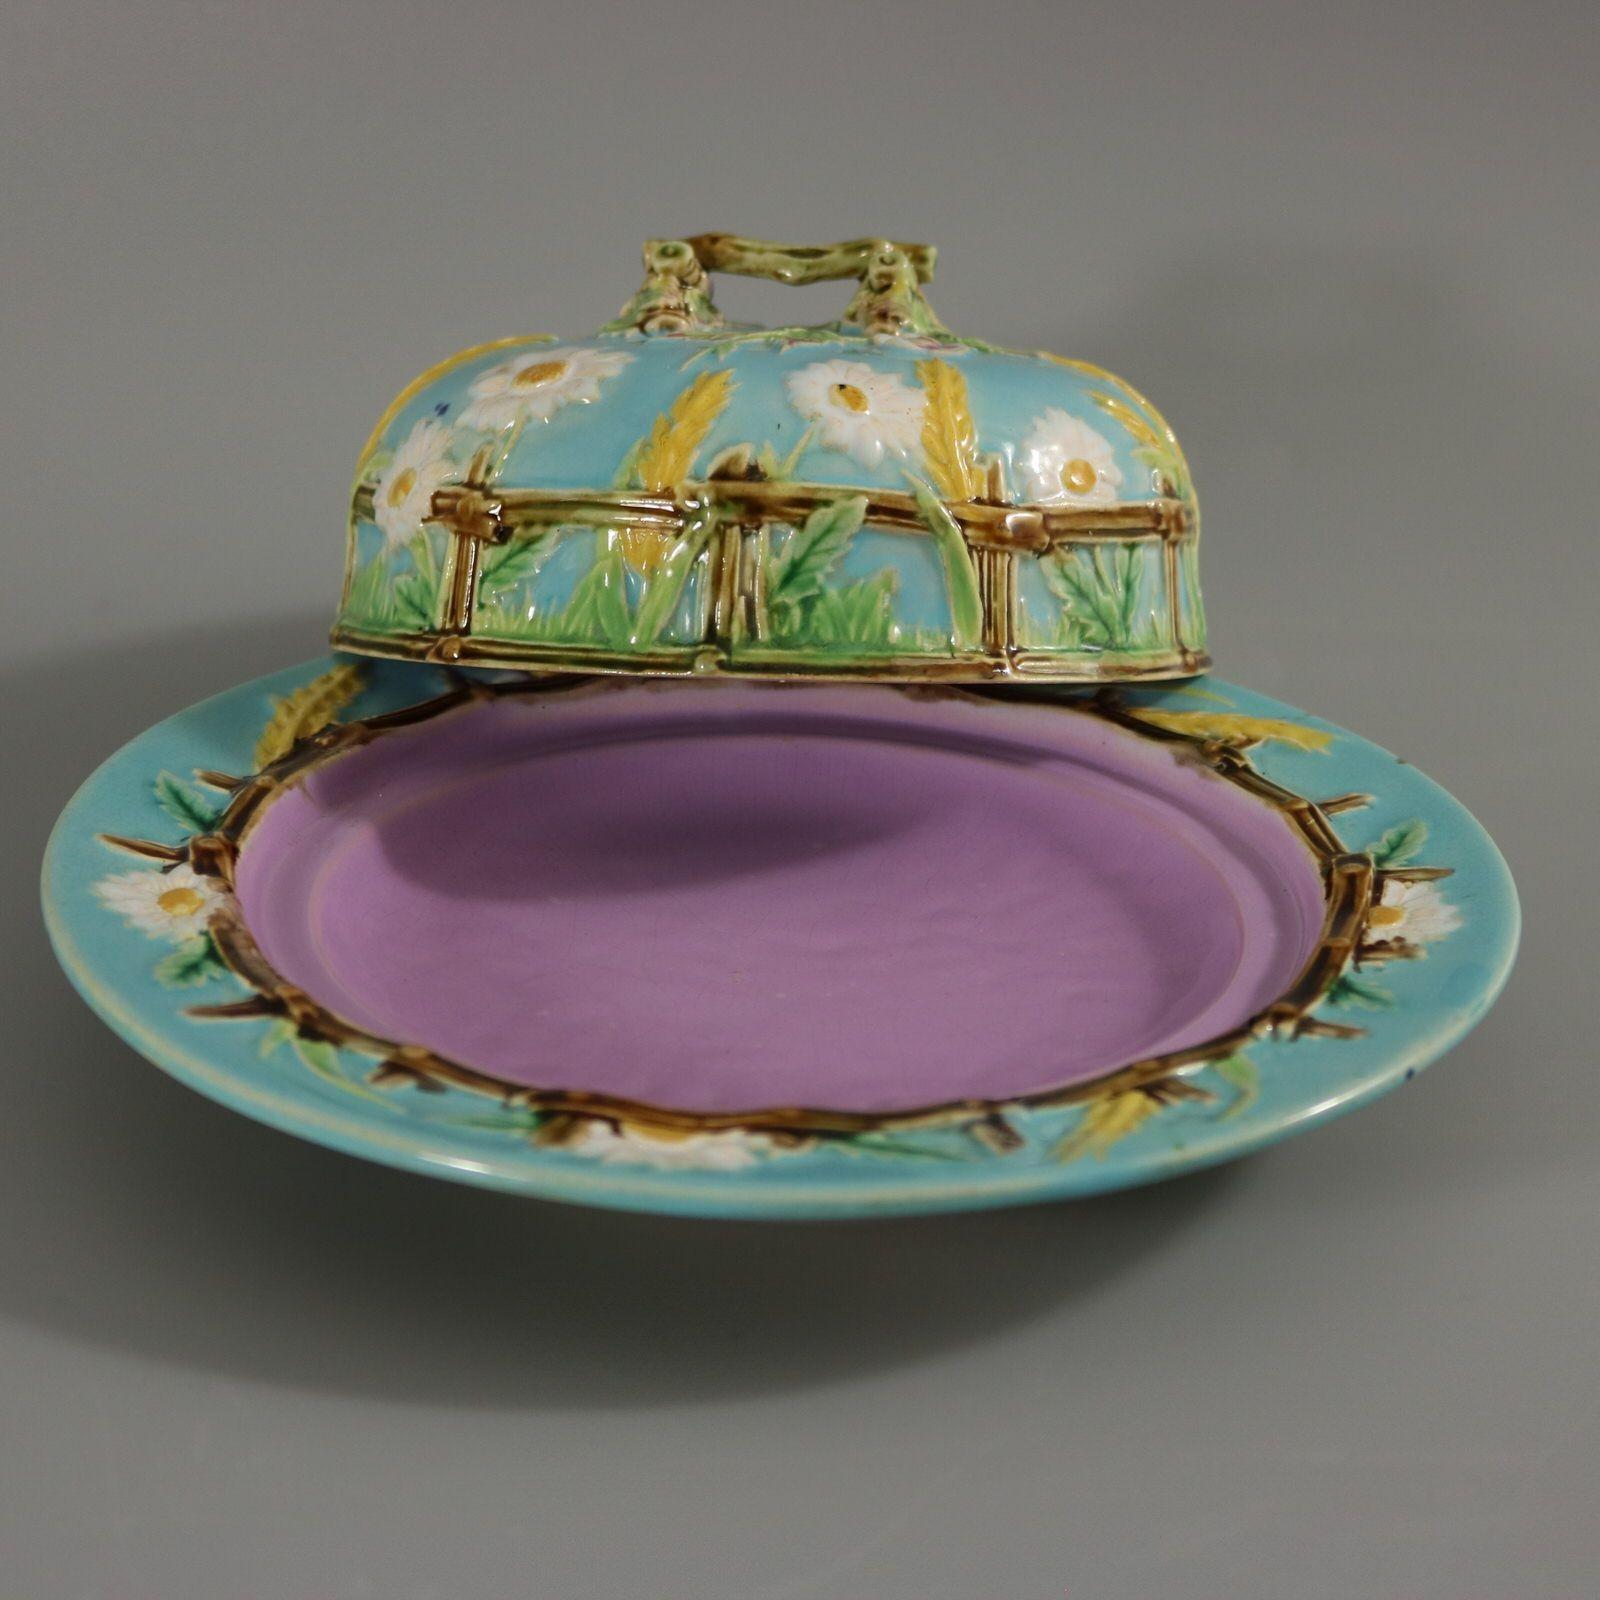 George Jones Majolica Muffin Dish and Cover For Sale 6